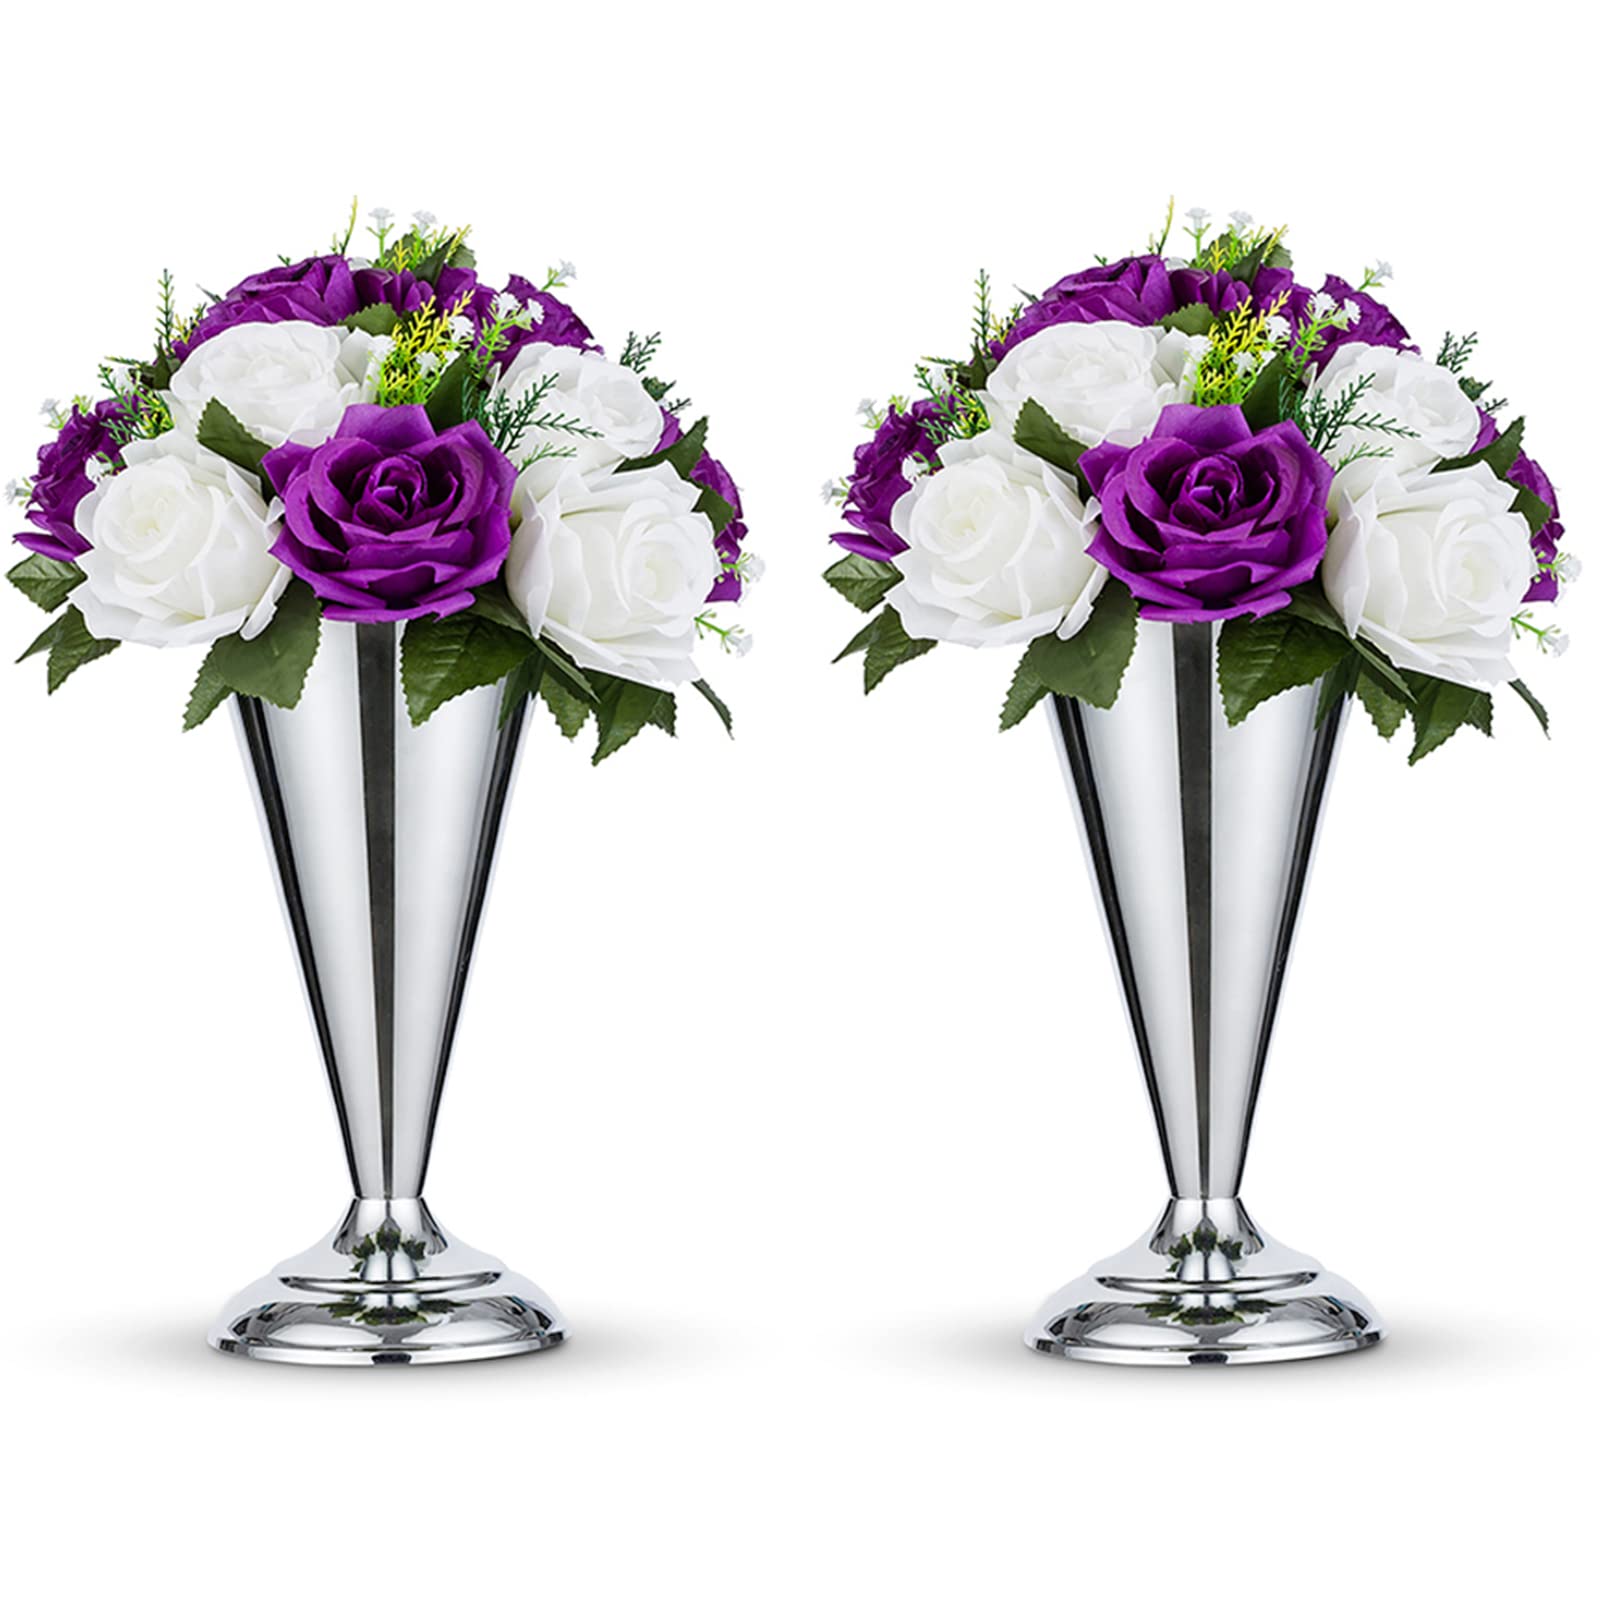 Tabletop Metal Wedding Flower Vase Table Decorative Centerpiece(Artificial flower are not included.)